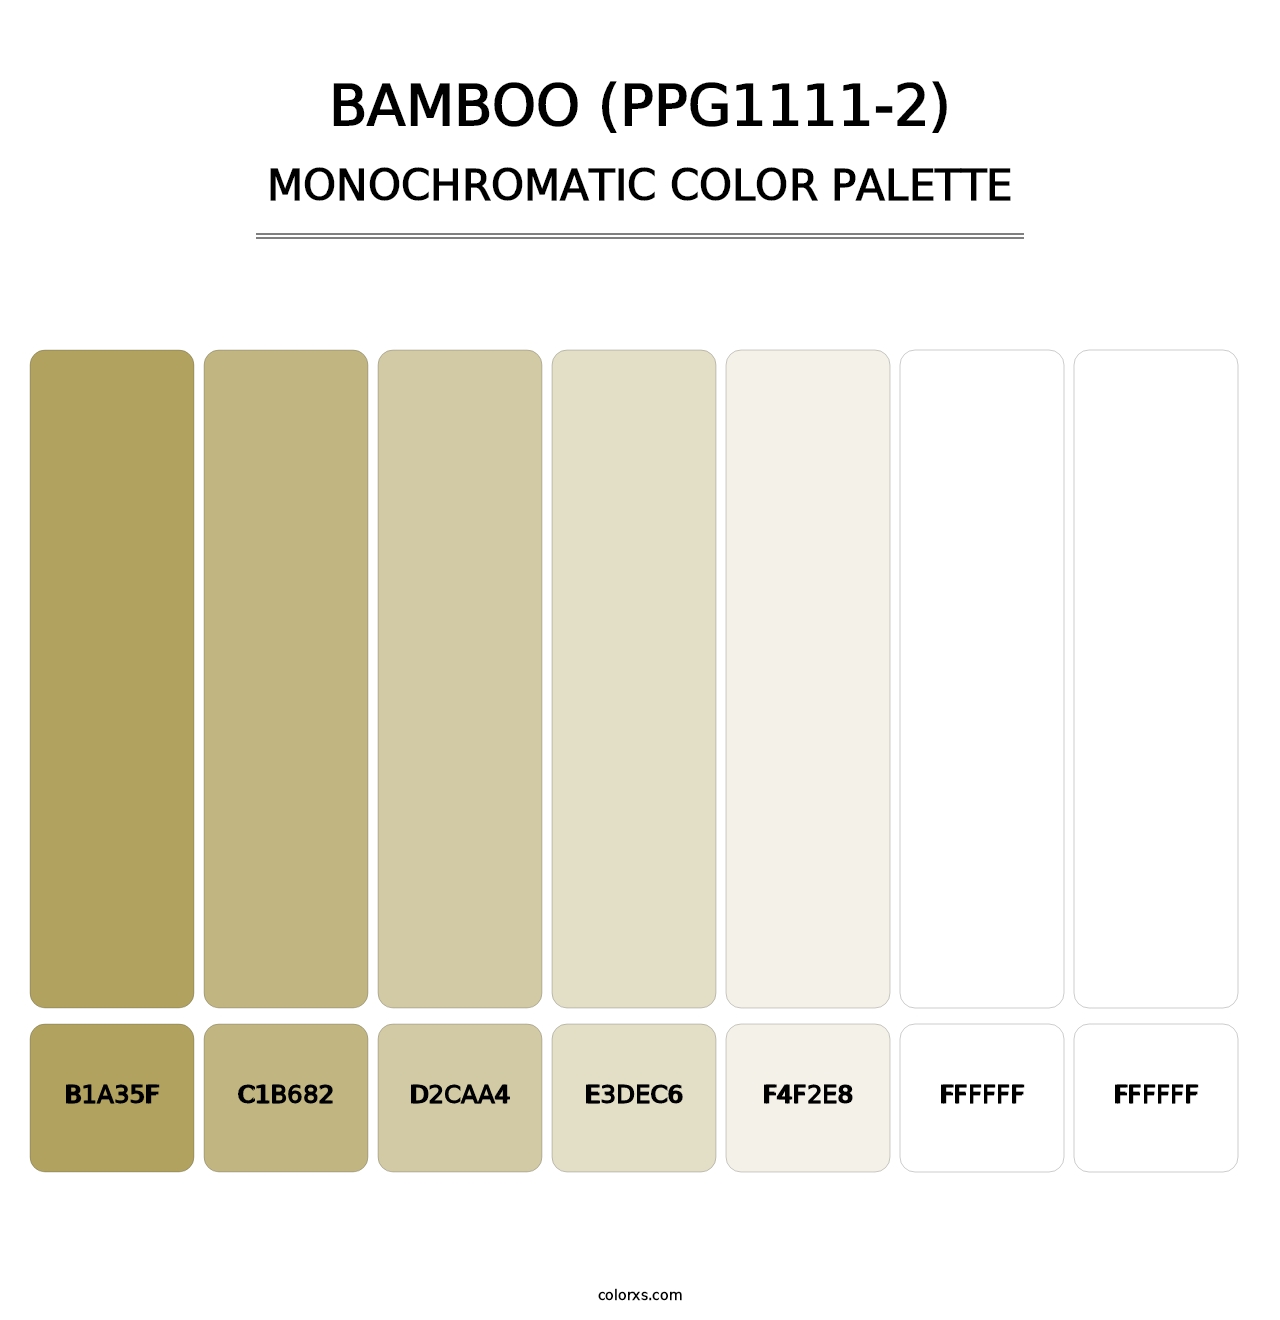 Bamboo (PPG1111-2) - Monochromatic Color Palette